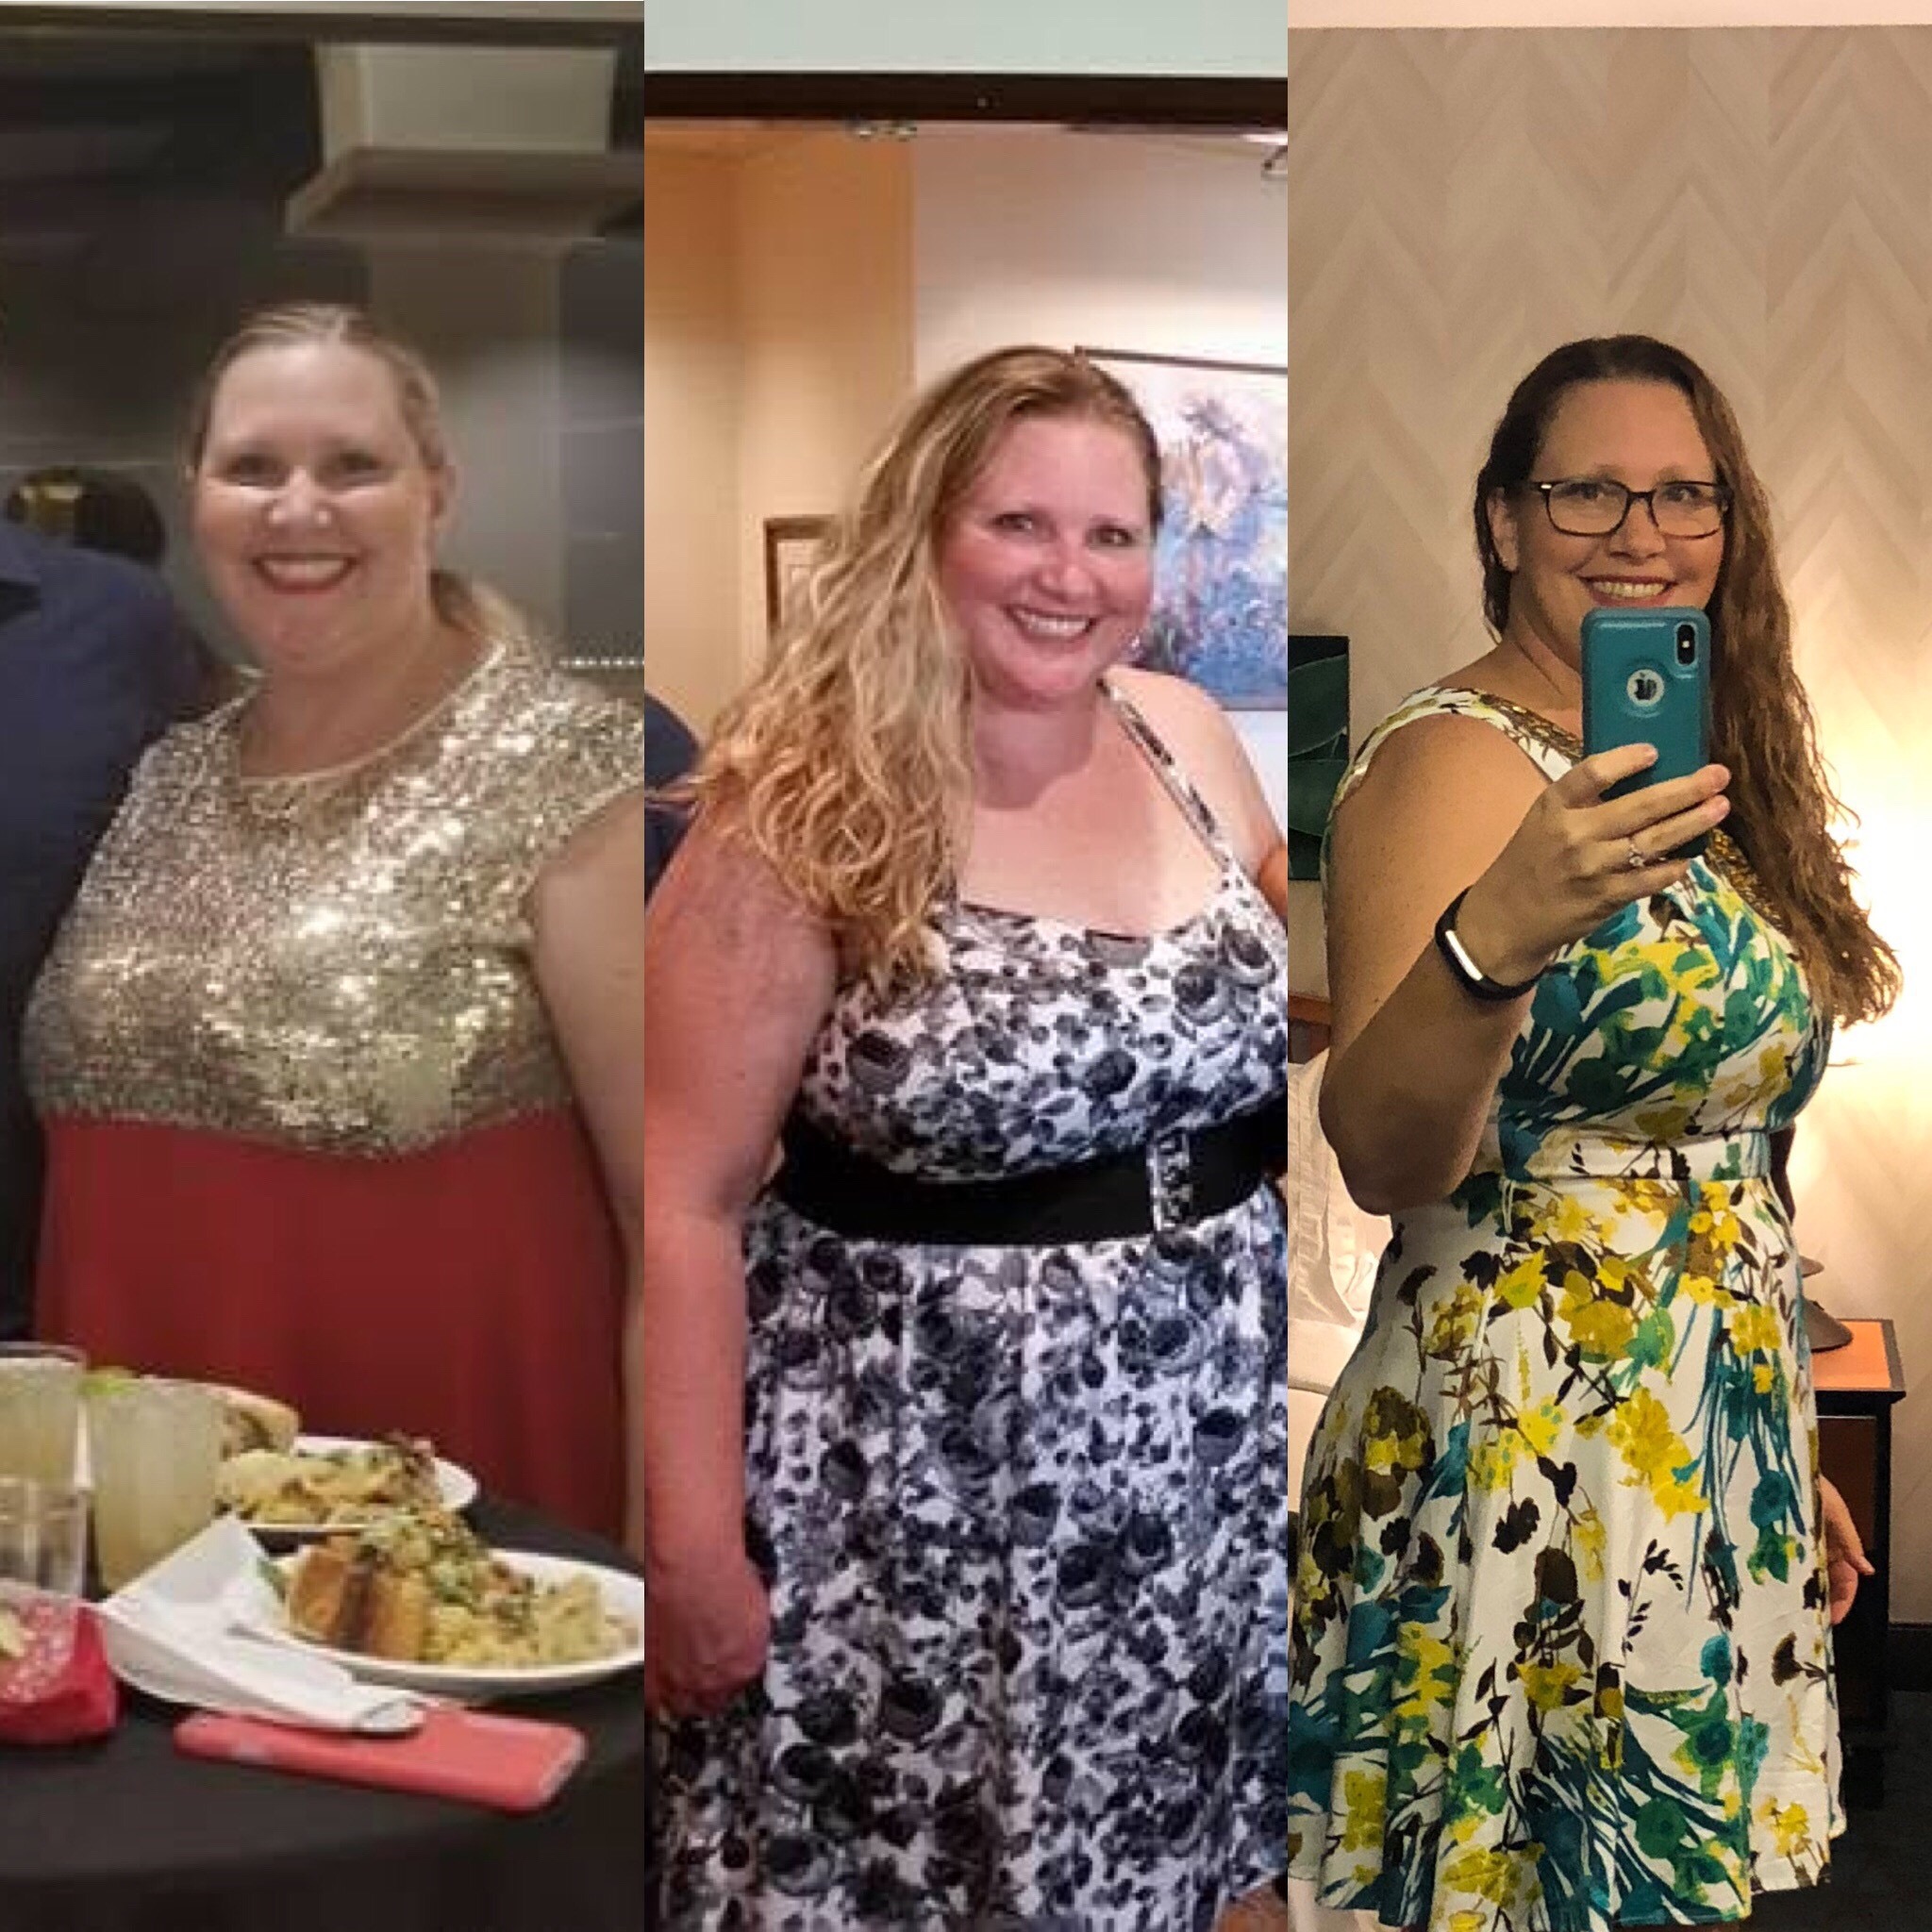 Kimberly Lost 40 Pounds With The 30 Day Clean Eating